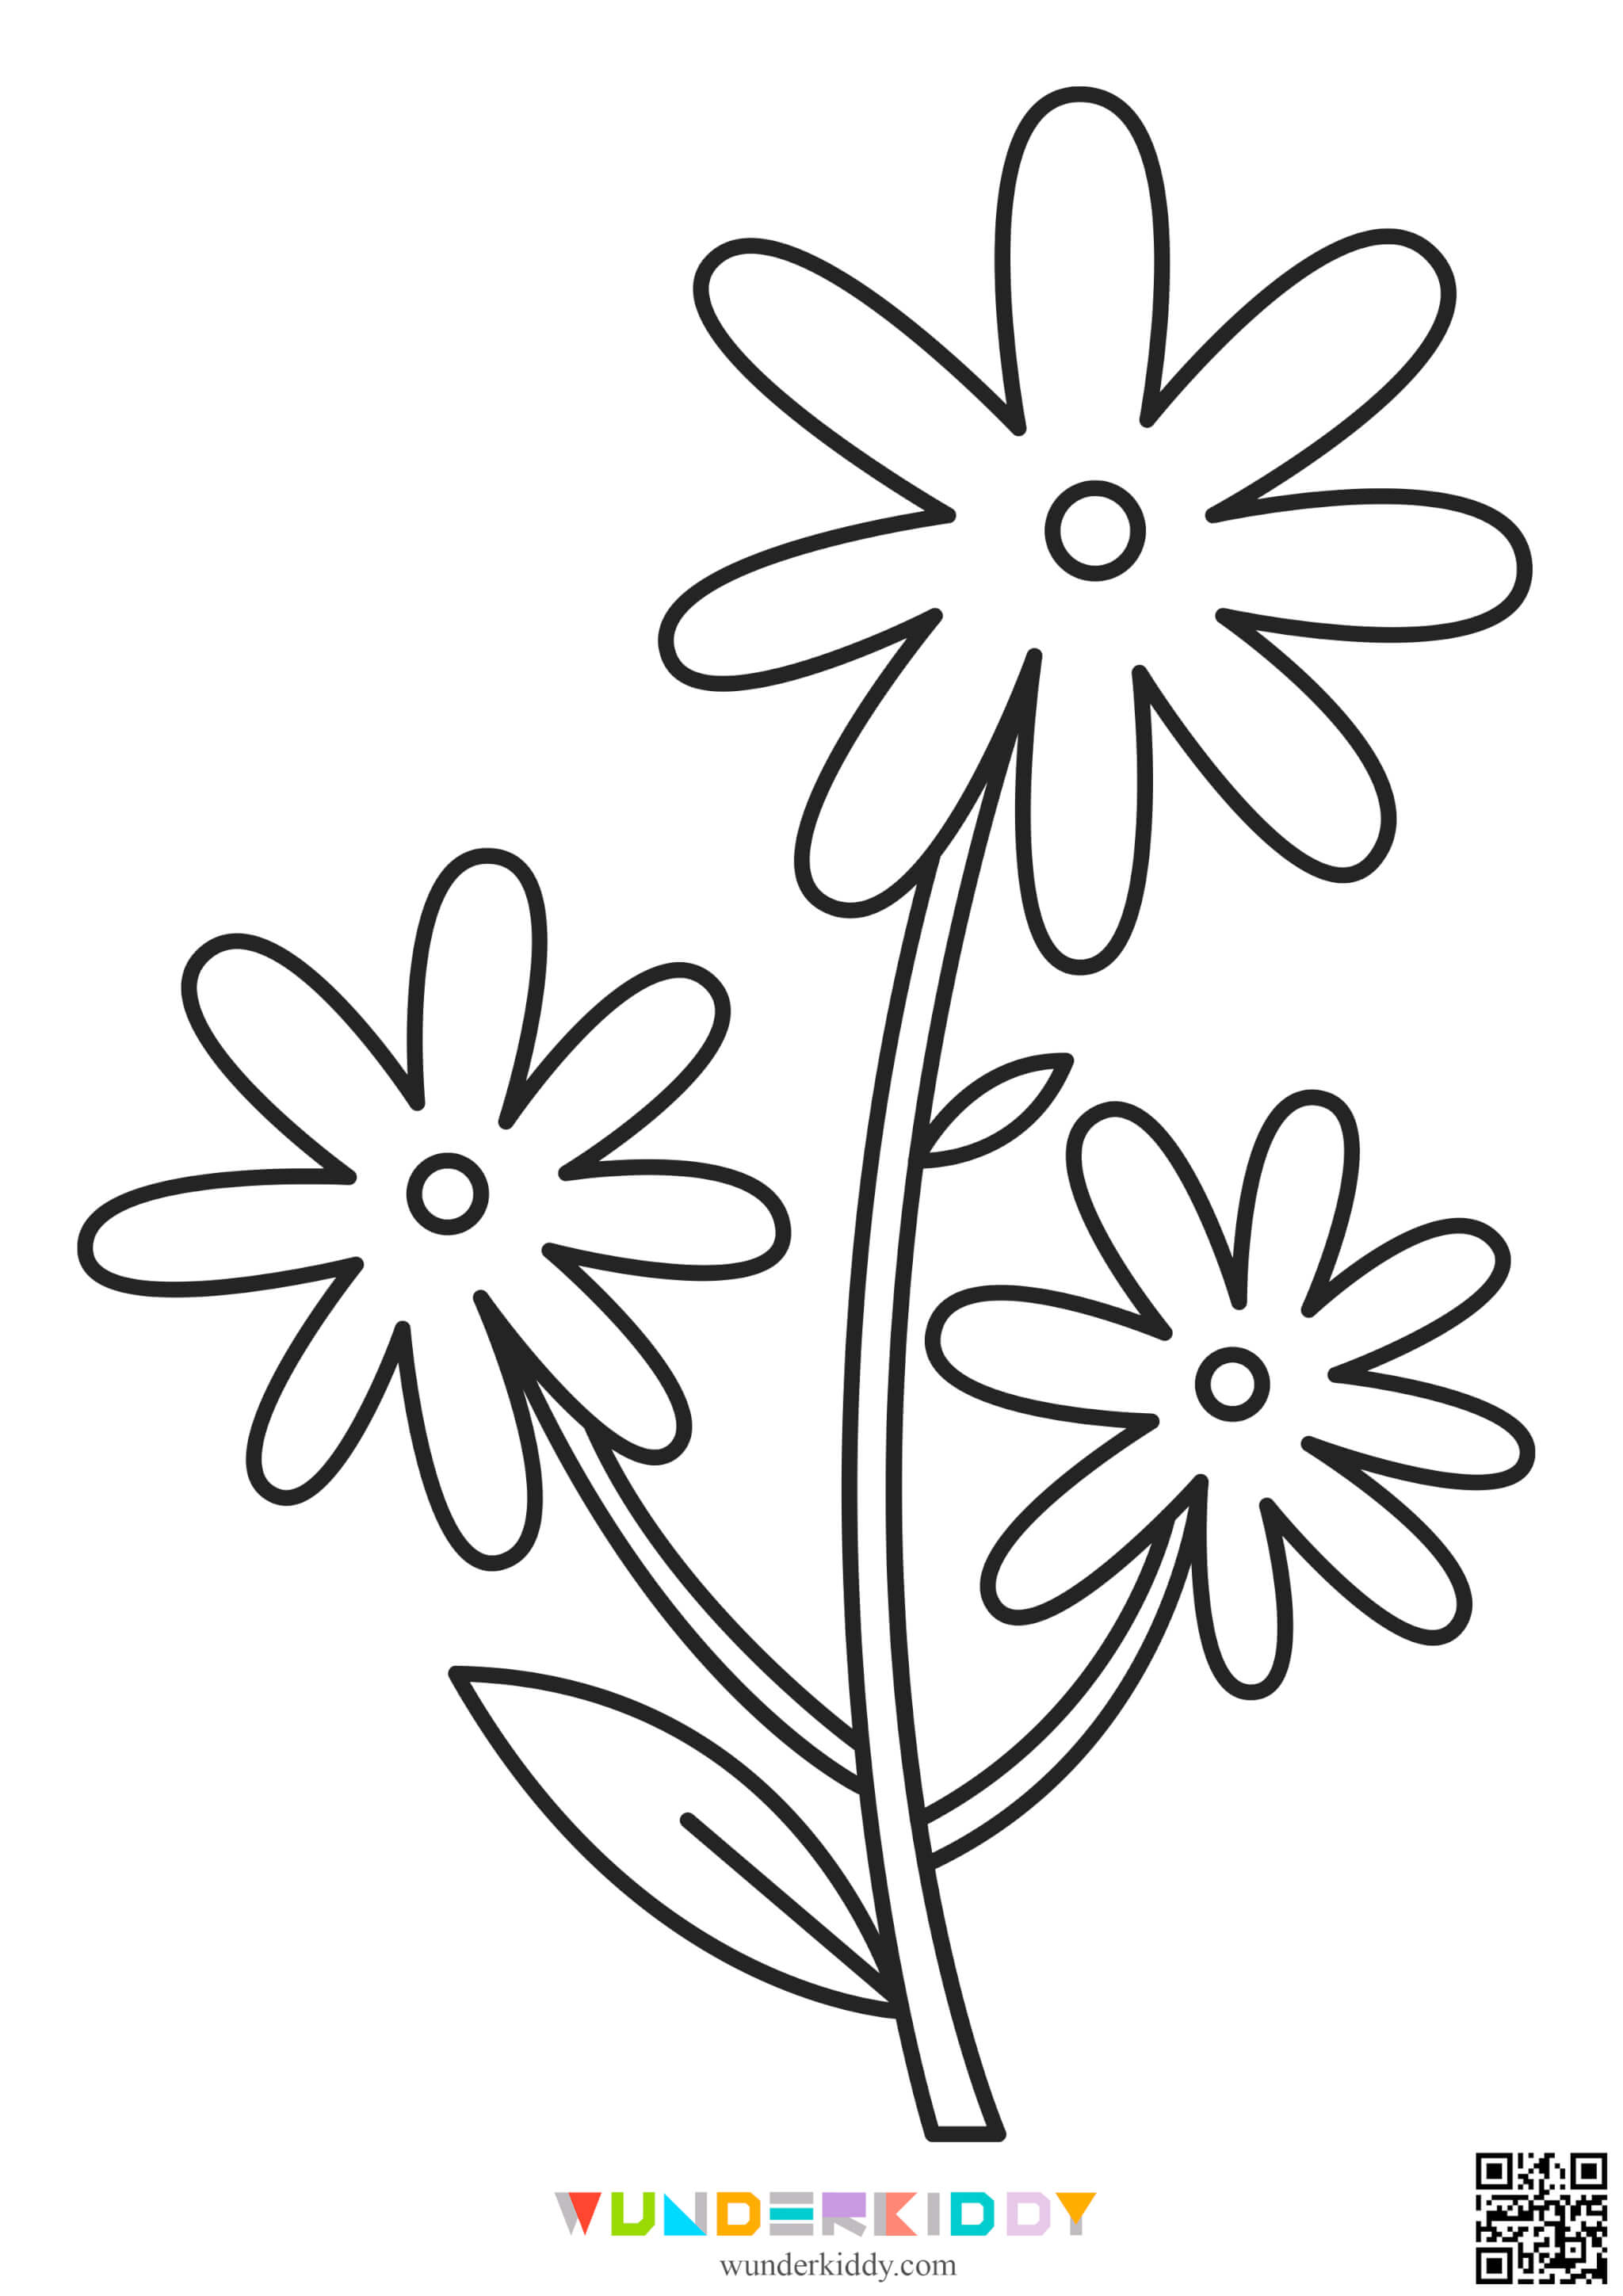 Flower Printable Coloring Pages - Image 22